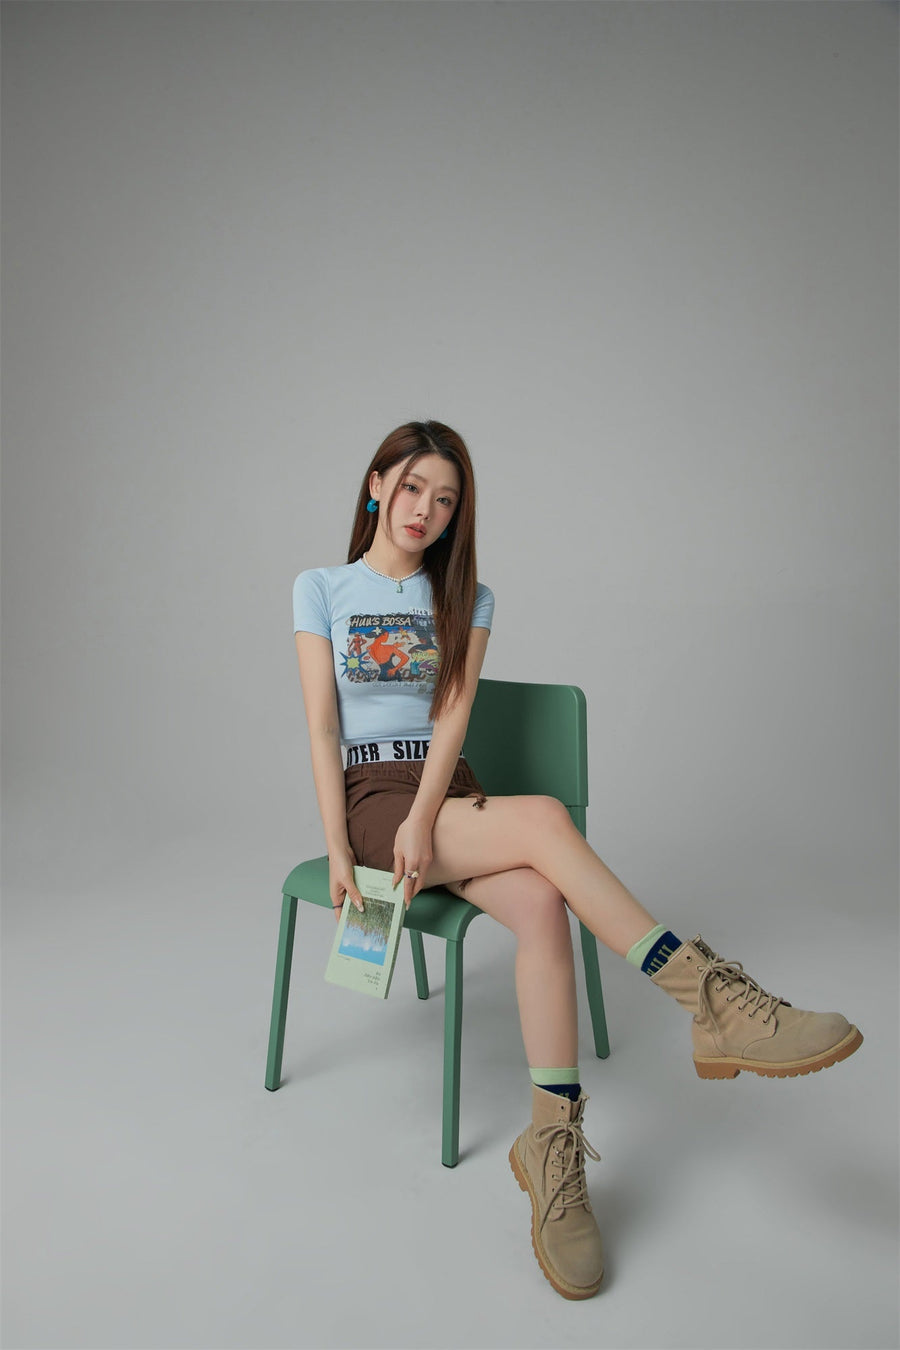 CHUU Size Doesnt Matter Beach Day Cropped T-Shirt